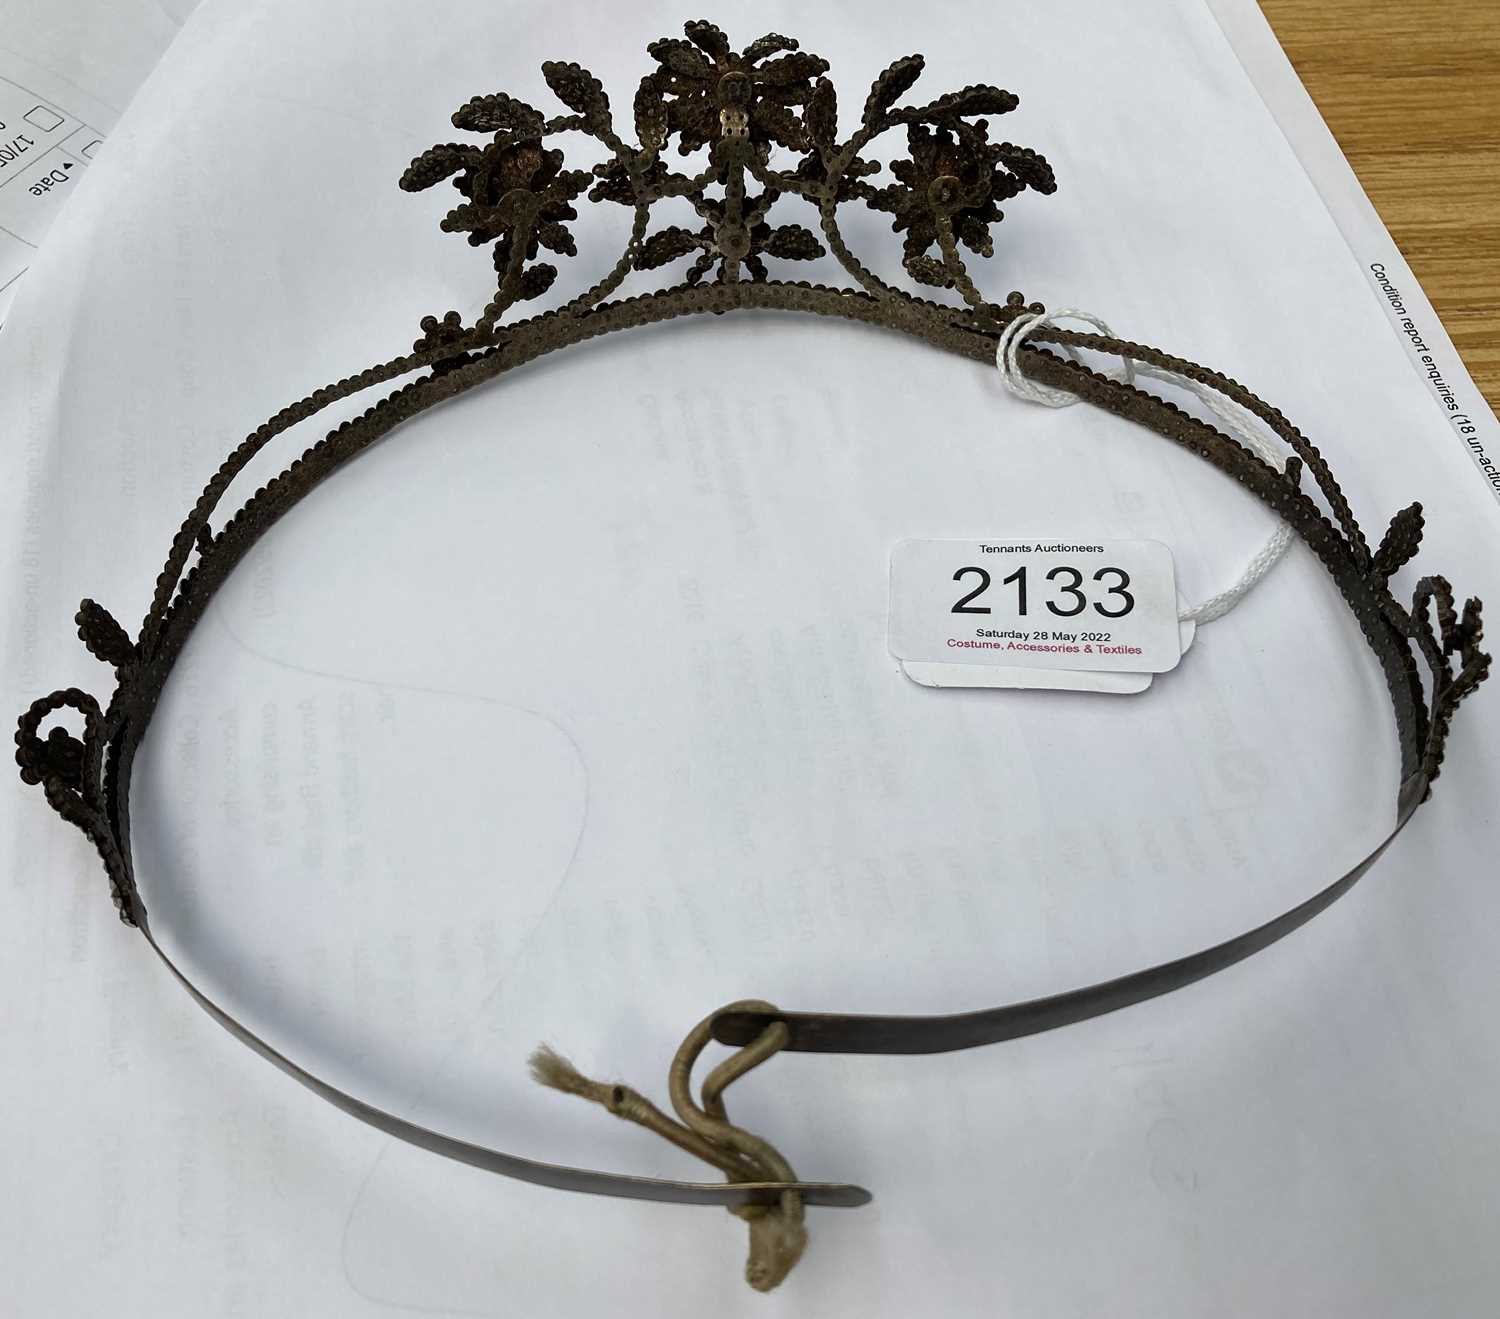 19th Century and Later Cut Steel Jewellery, comprising a decorative tiara with rotating flower heads - Image 15 of 19